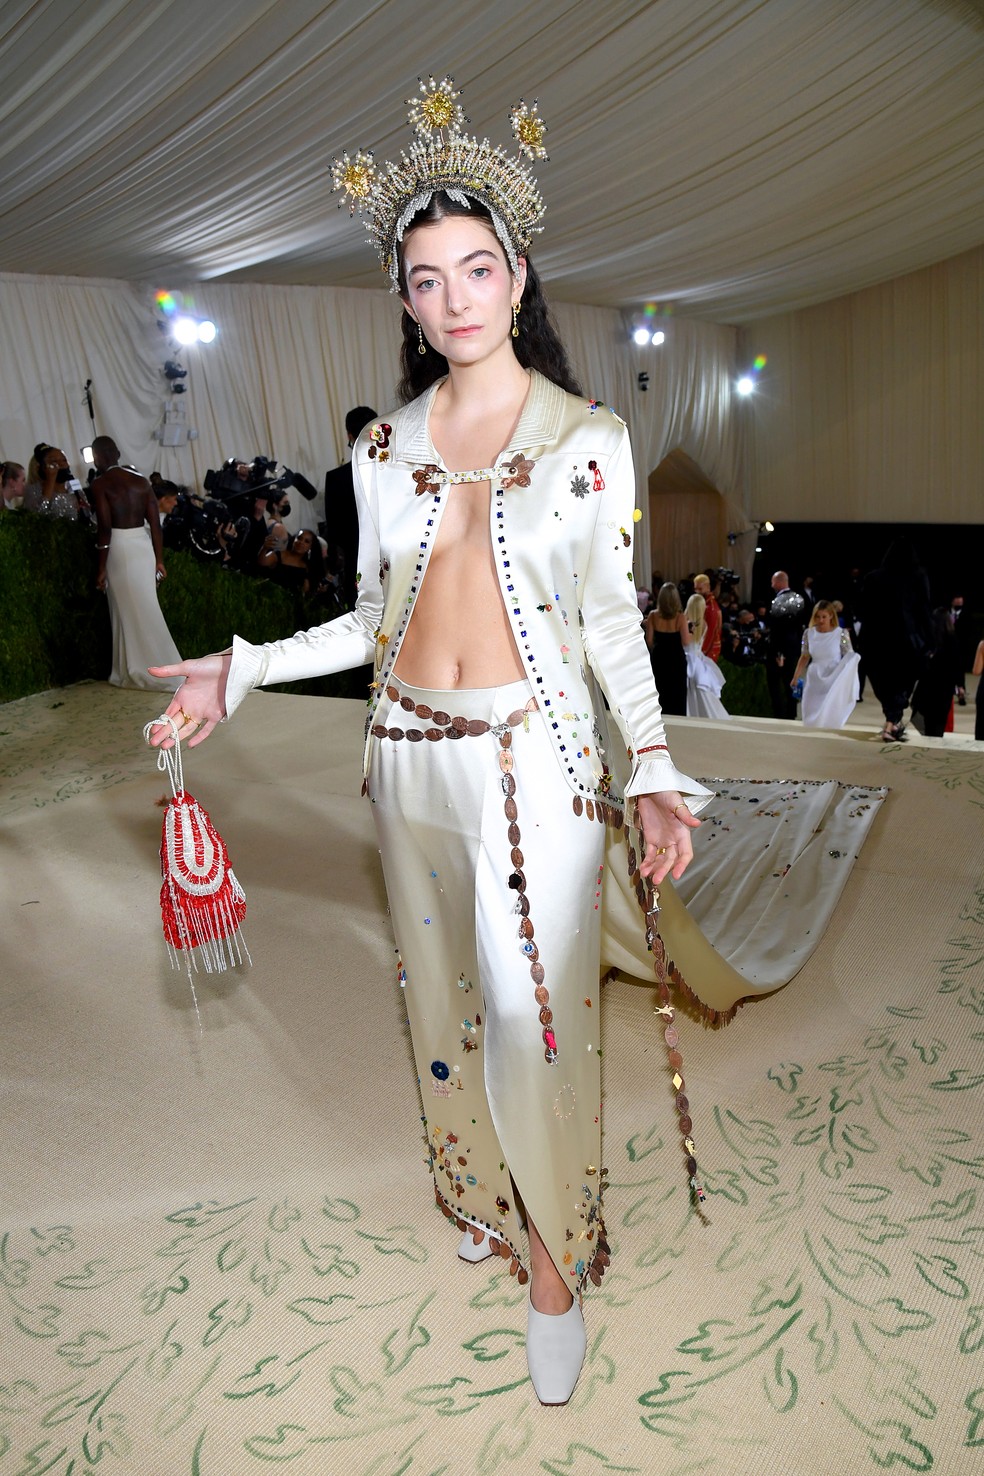  Lorde no Met Gala 2021 — Foto: Kevin Mazur/MG21/Getty Images For The Met Museum/Vogue